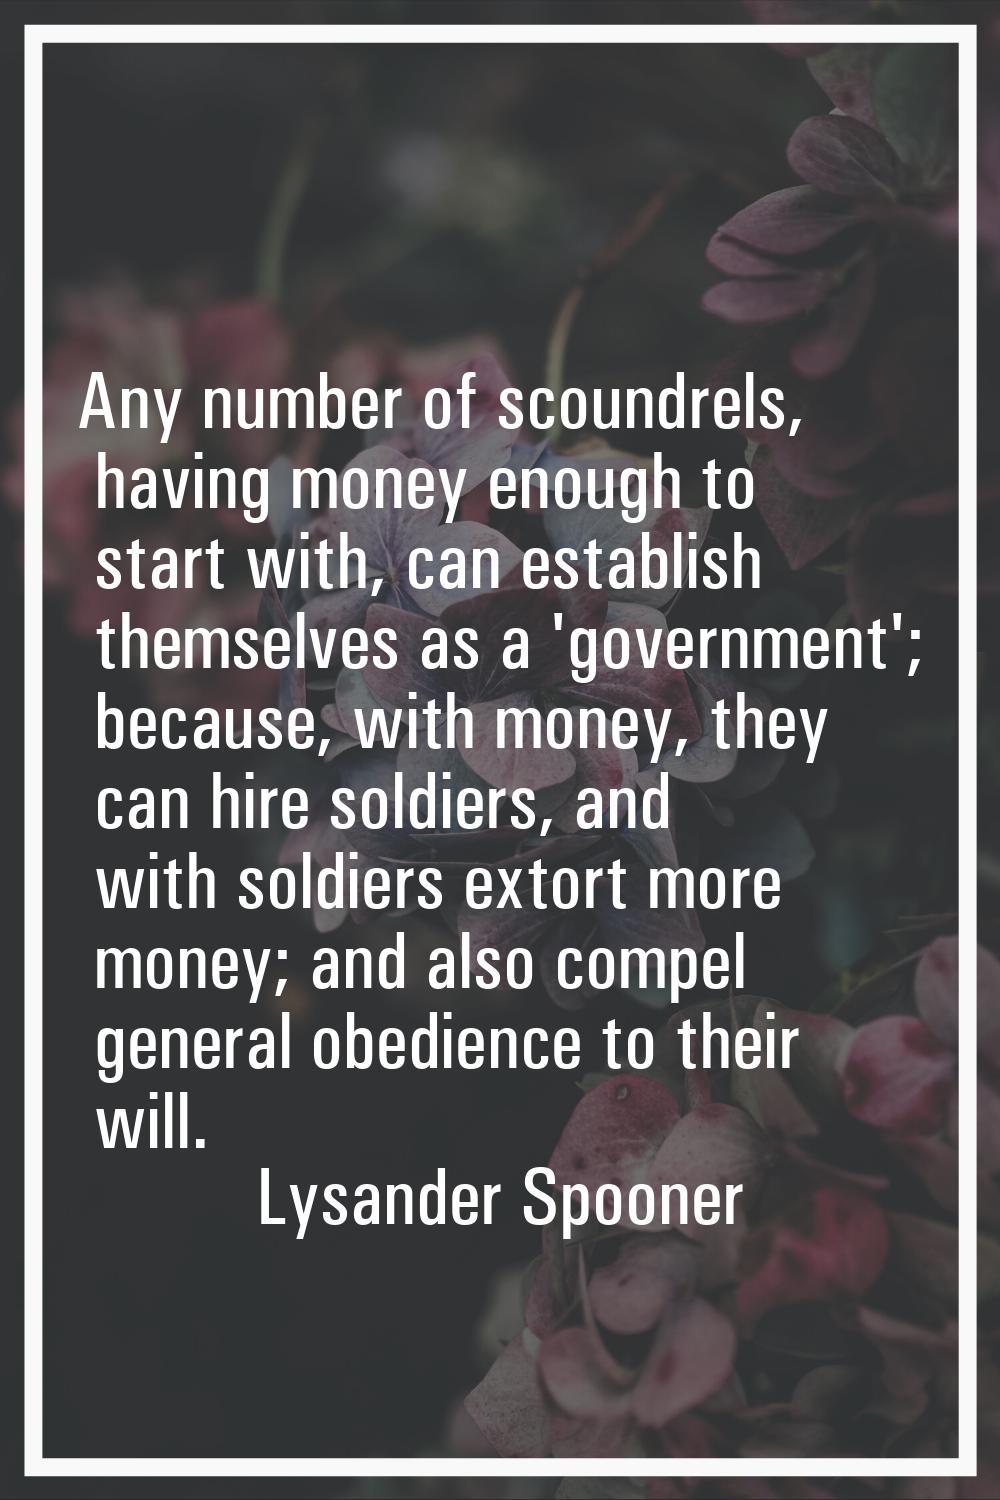 Any number of scoundrels, having money enough to start with, can establish themselves as a 'governm